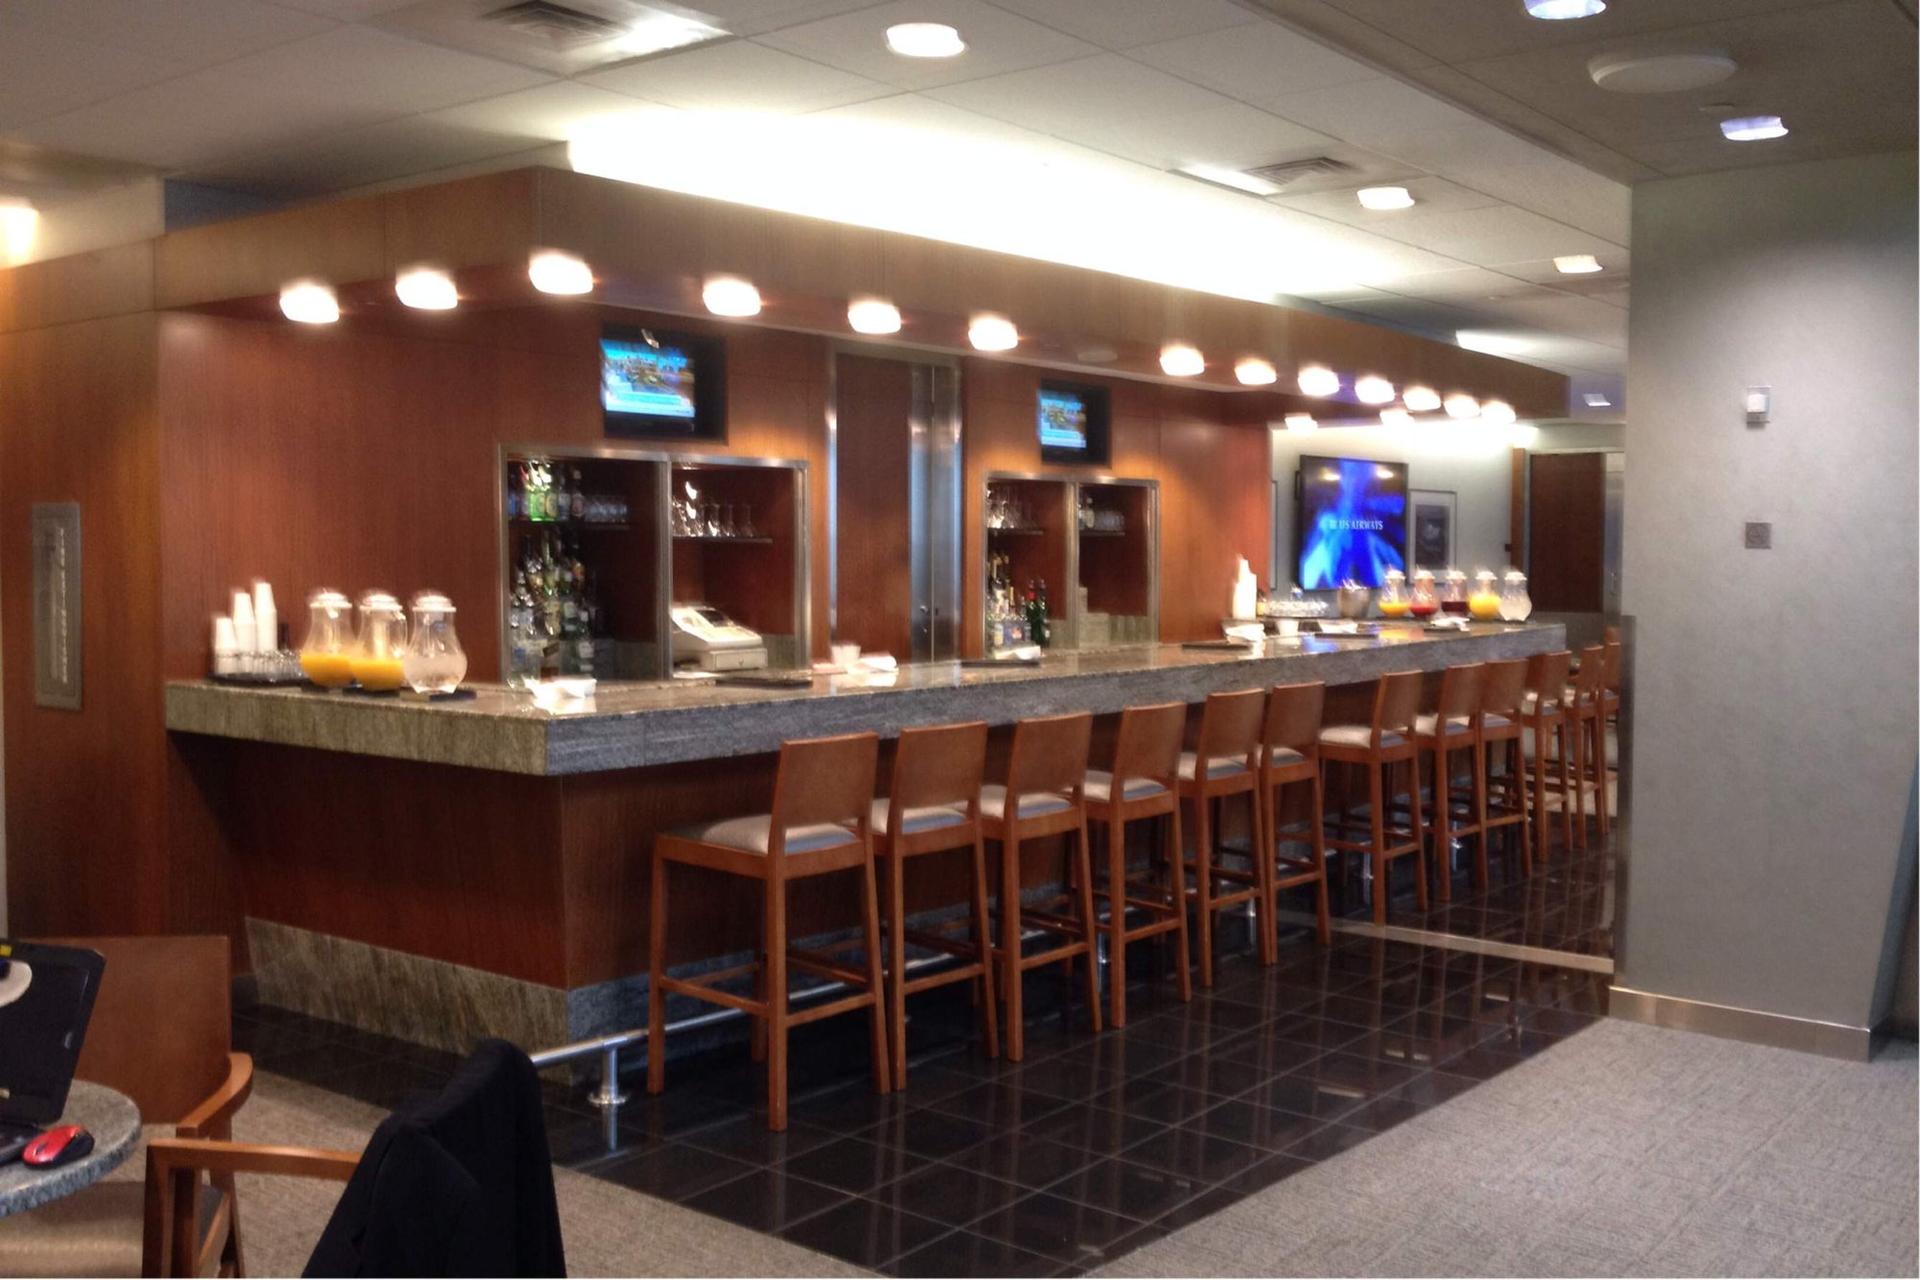 American Airlines Admirals Club image 17 of 48